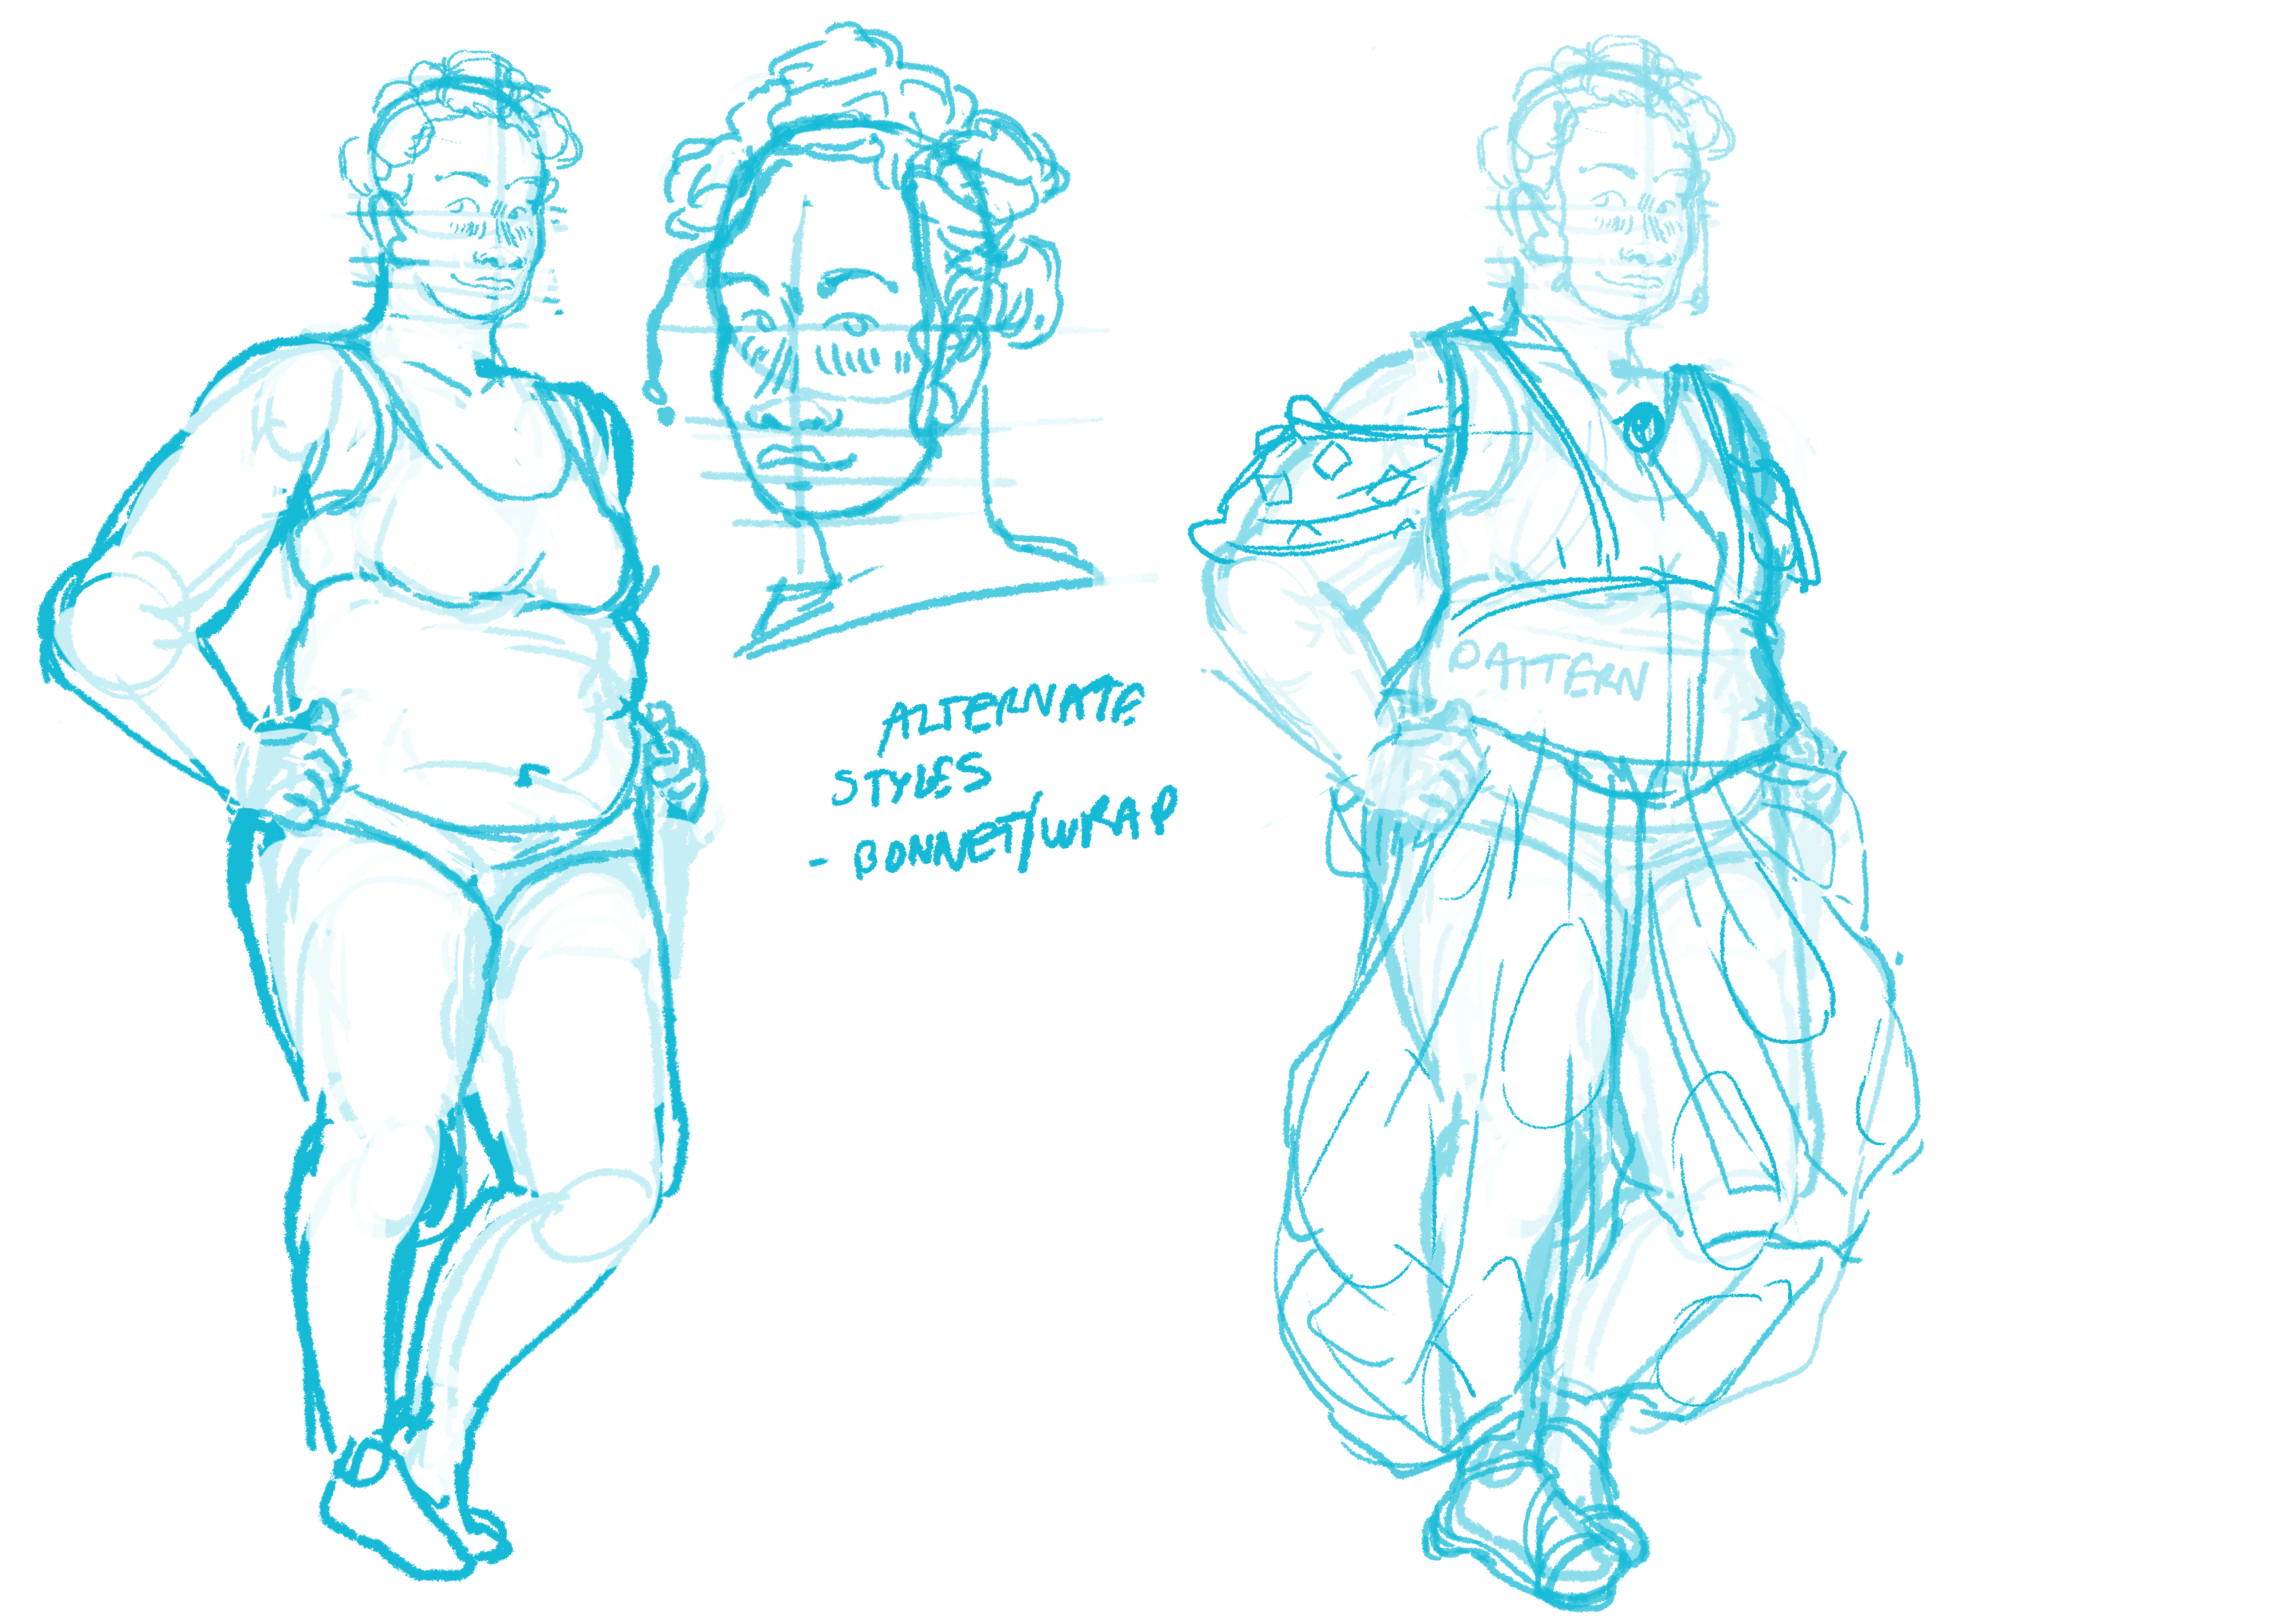 Two full-body sketches of Kimbuala, a young Black person with their hair in bantu knots. In the first sketch they're in their underwear and have a pear-shaped body, and in the second sketch they're wearing baggy trousers and sleeves with wax print patterns on and a waistcoat. There's also a headshot of them showing their face in more detail.